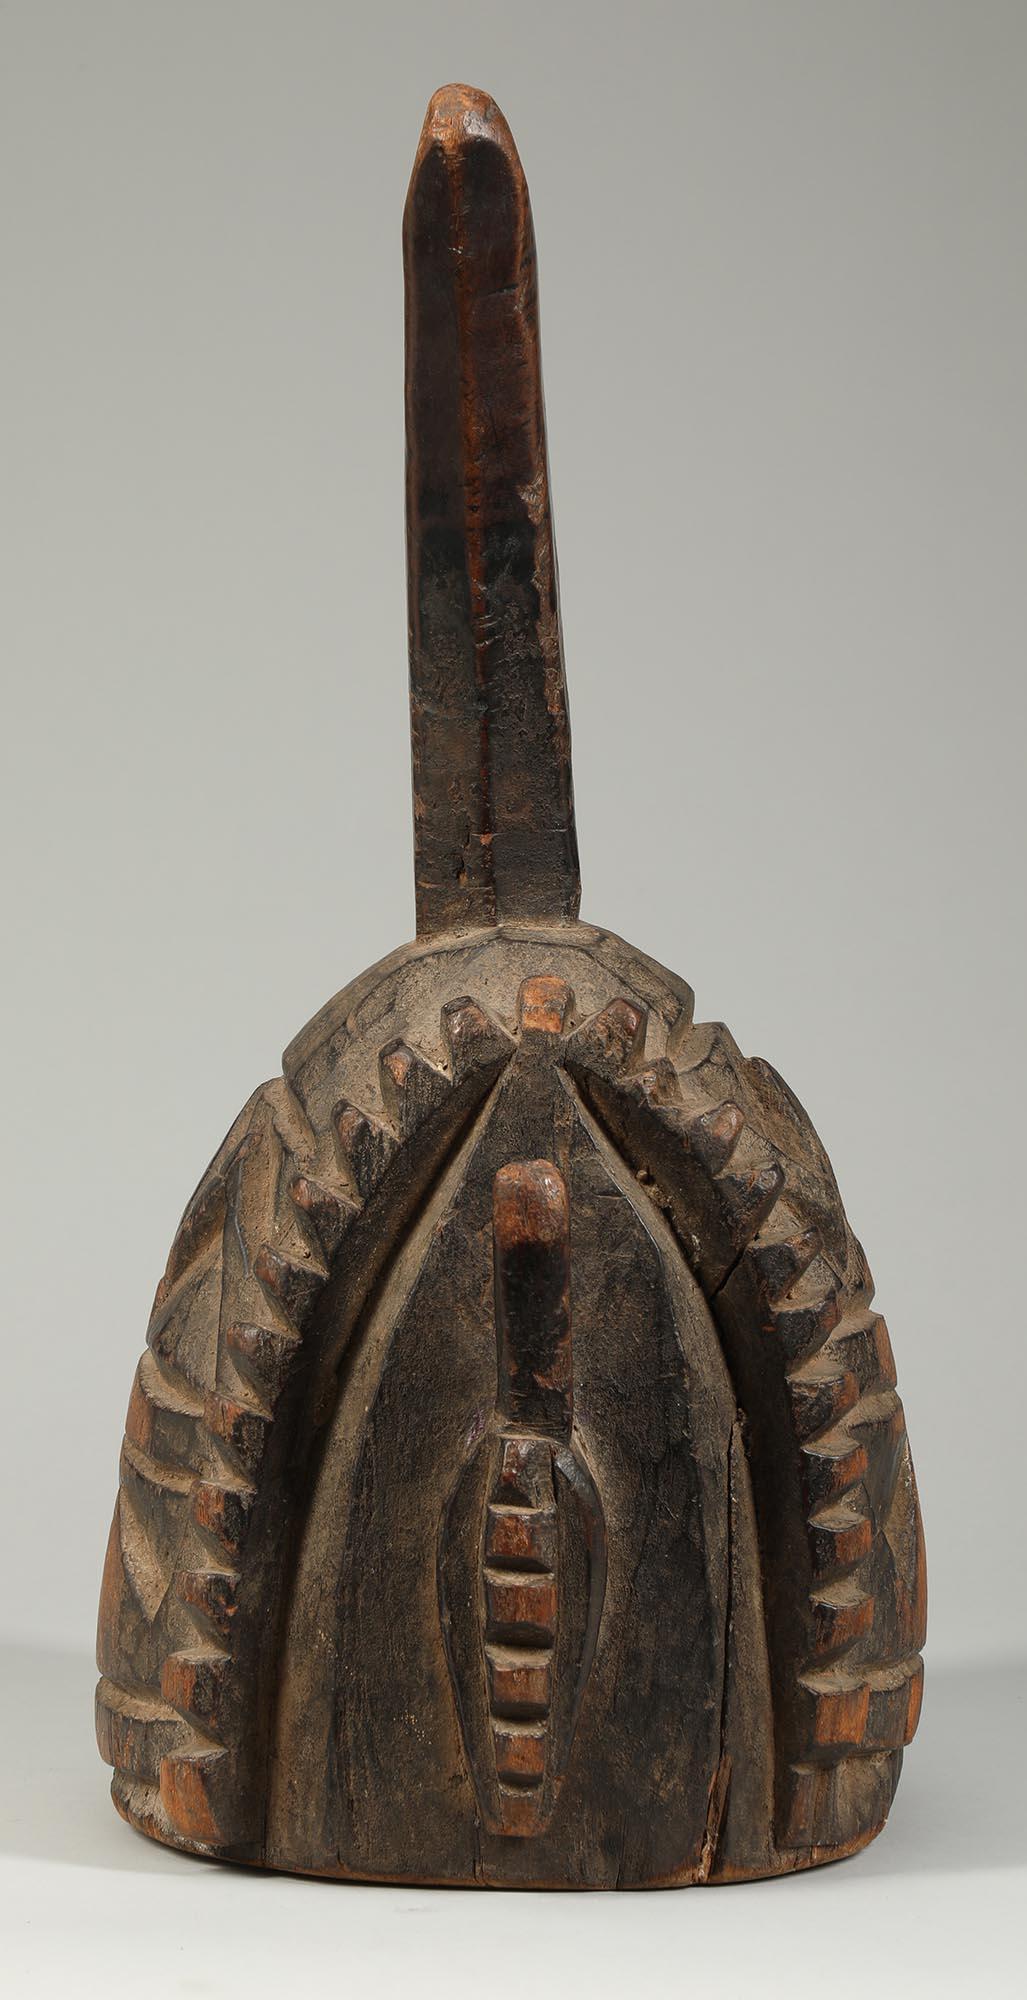 Nupe Helmet shaped carved wood shrine floor polisher West Africa. Used to clear and prepare the dirt surface inside a shrine. Solid carved wood with rising crest that could be used as a handle.  Deep patina from handling and use, heavy smooth wear